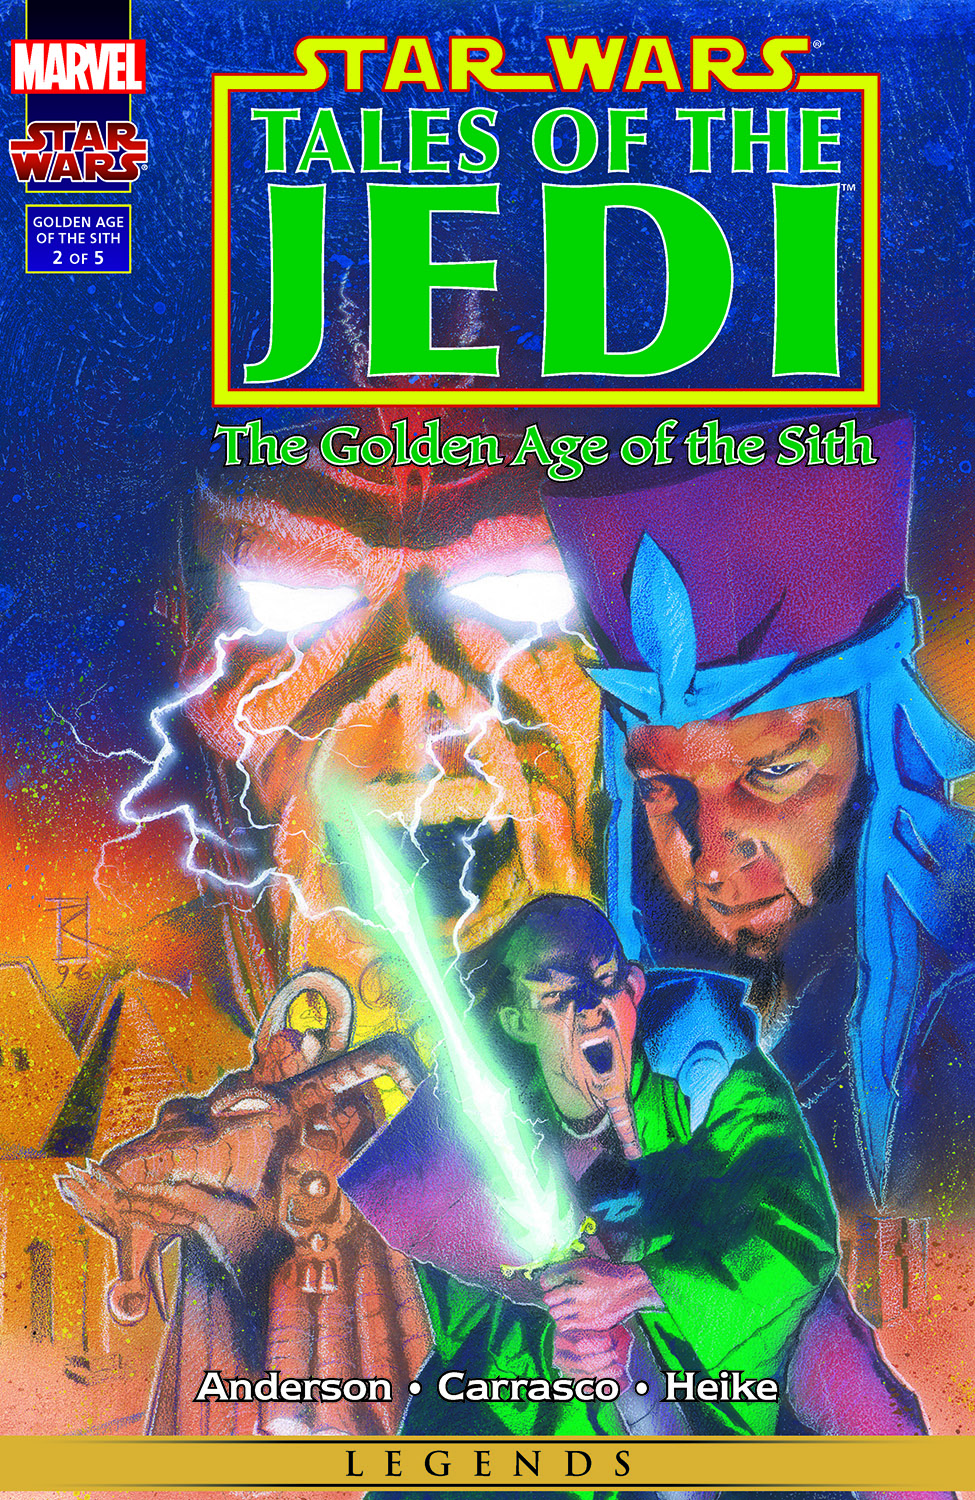 Star Wars: Tales of the Jedi - The Golden Age of the Sith (1996) #2